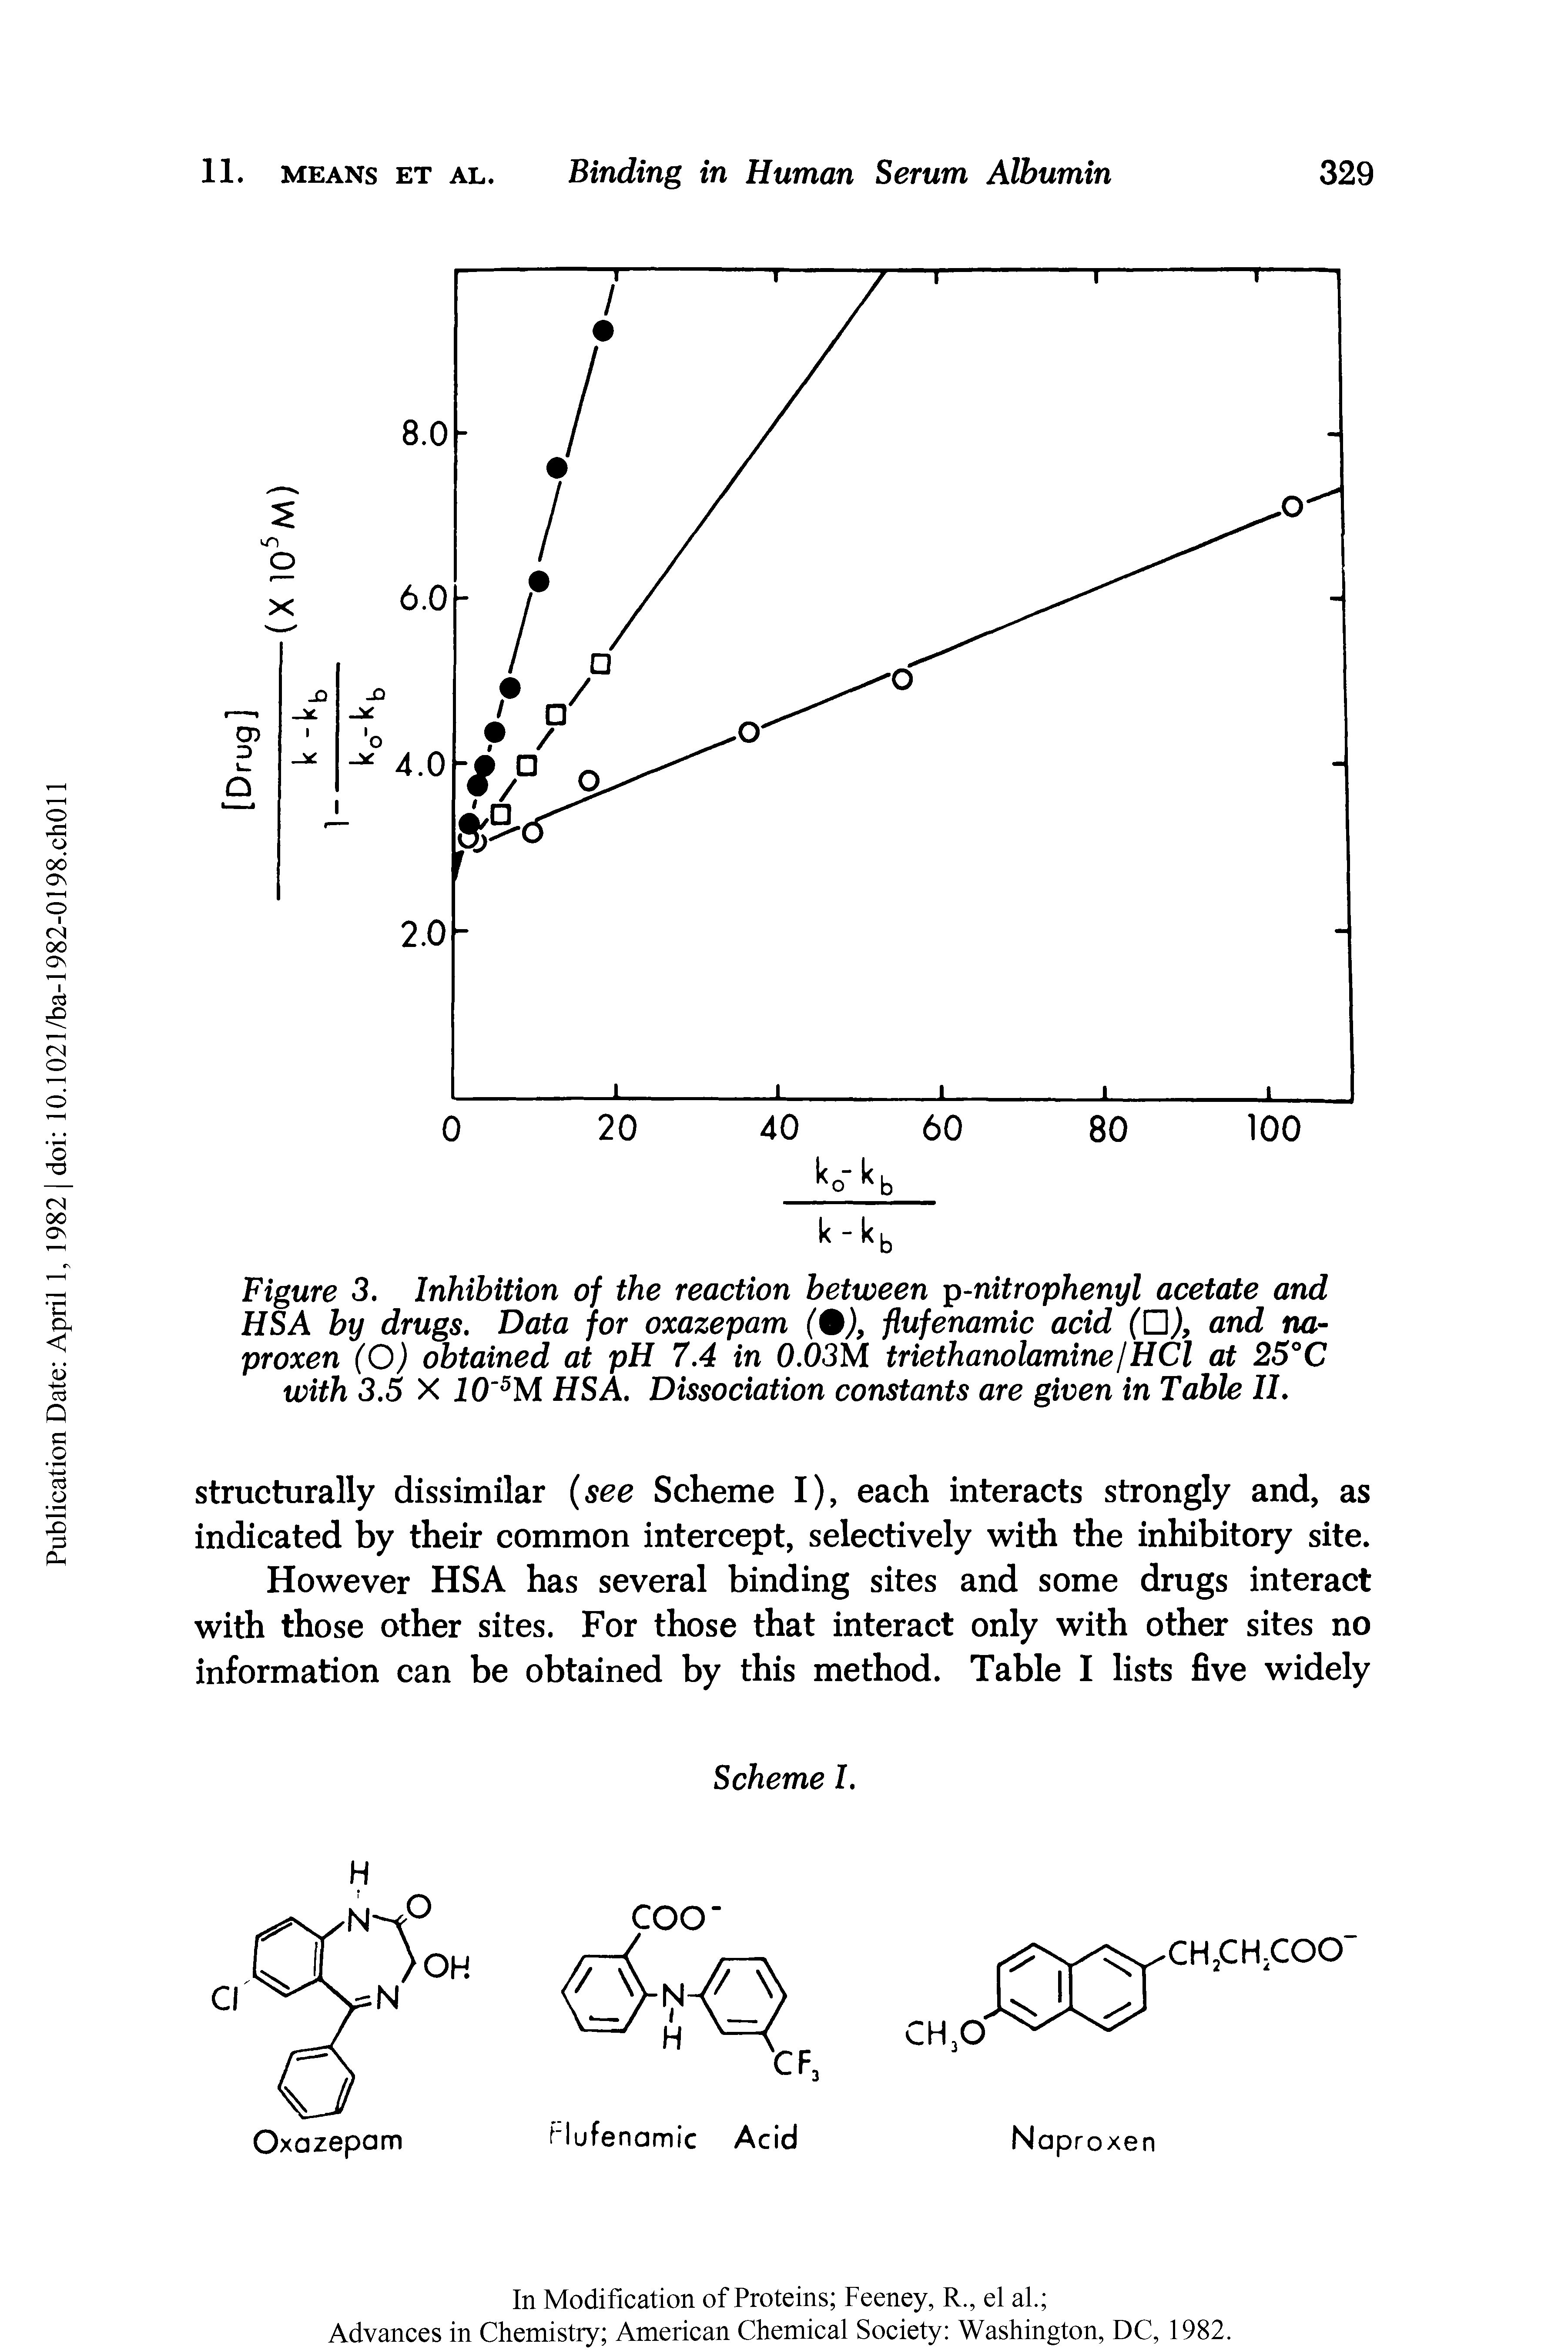 Figure 3. Inhibition of the reaction between p-nitrophenyl acetate and HSA by drugs. Data for oxazepam (0), fiufenamic acid (D), and naproxen (O) obtained at pH 7.4 in 0.03M triethanolamine/HCl at 25°C with 3.5 X 10 5M HSA. Dissociation constants are given in Table II.